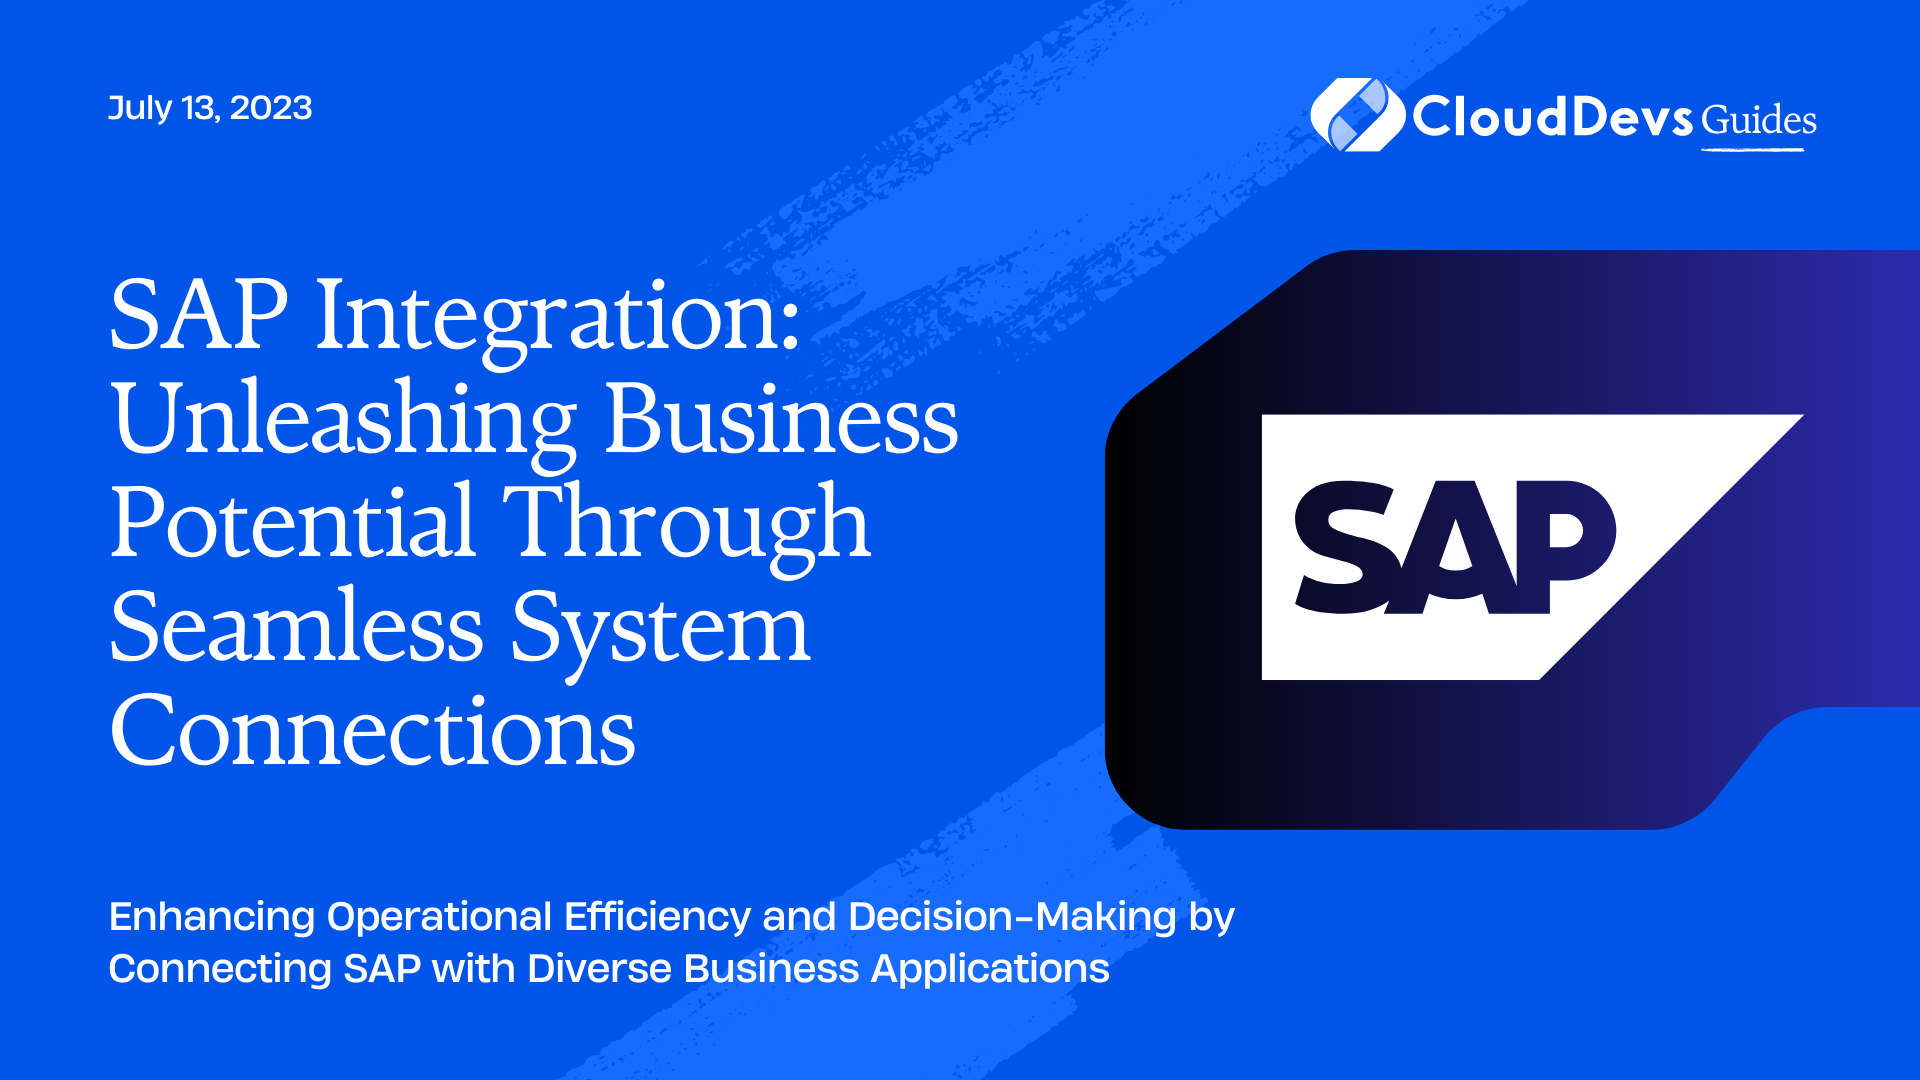 SAP Integration: Unleashing Business Potential Through Seamless System Connections